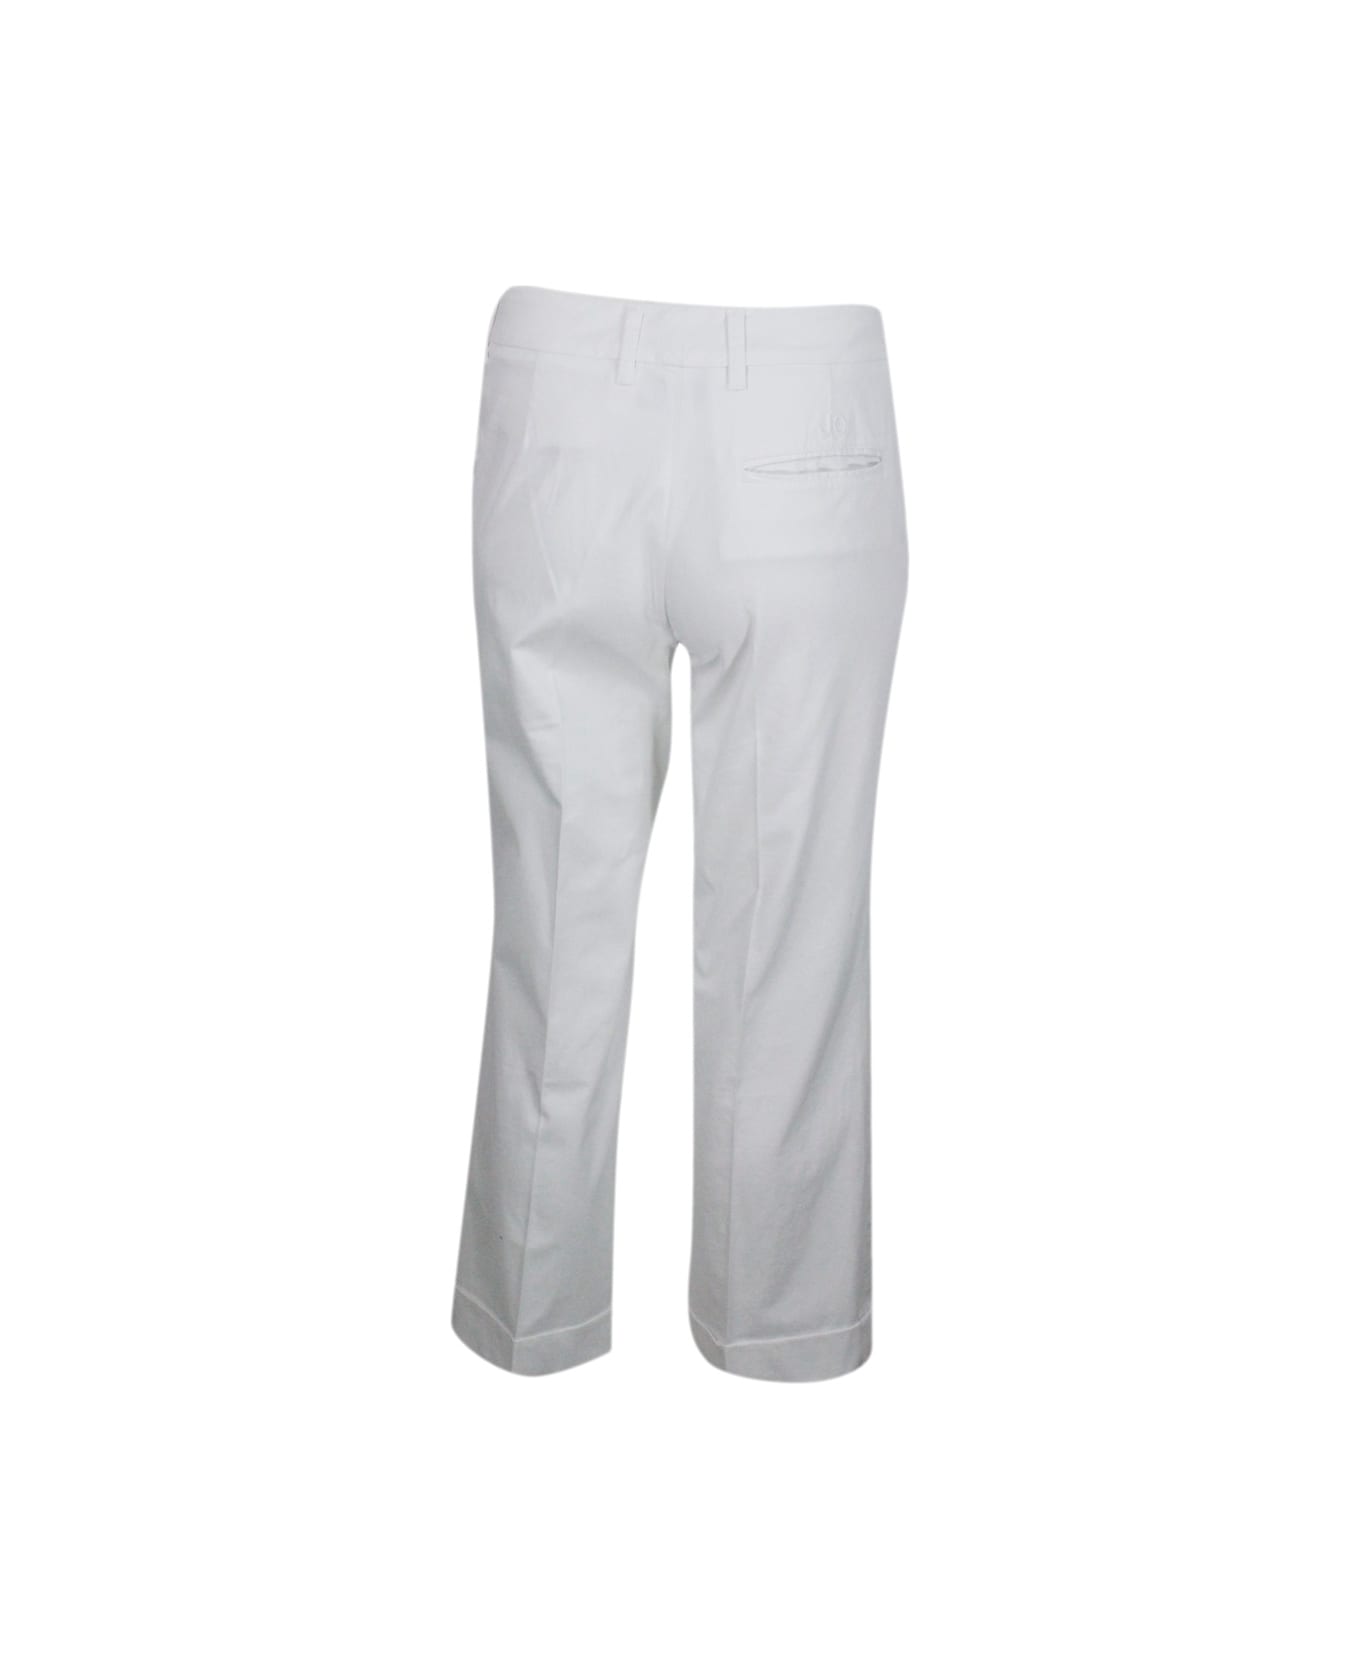 Jacob Cohen Luxury Edition Selena Cropped Trousers In Soft Stretch Cotton With Chinos America Pockets With Zip Closure And Small Logo Above The Back Pocket - White